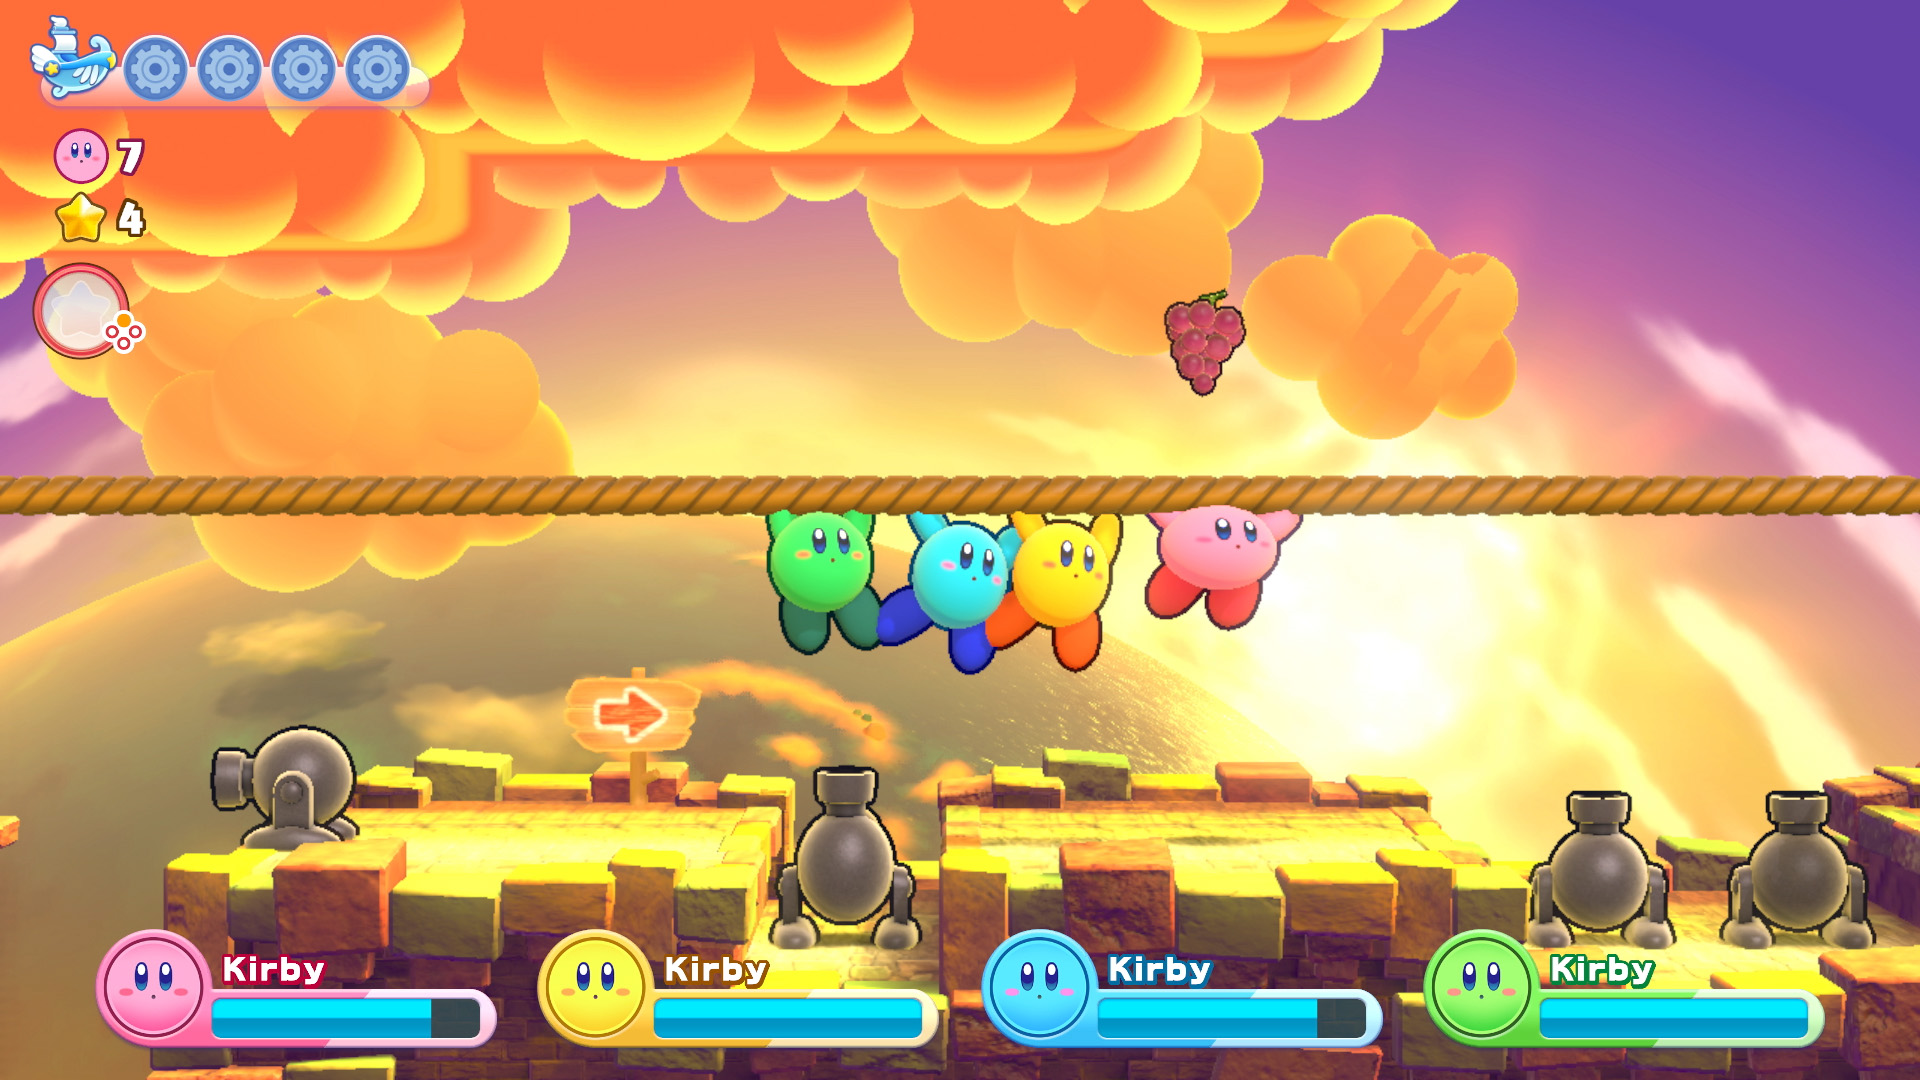 Kirby's Return to Dream Land Deluxe Nintendo Switch Account pixelpuffin.net Activation Link $37.28